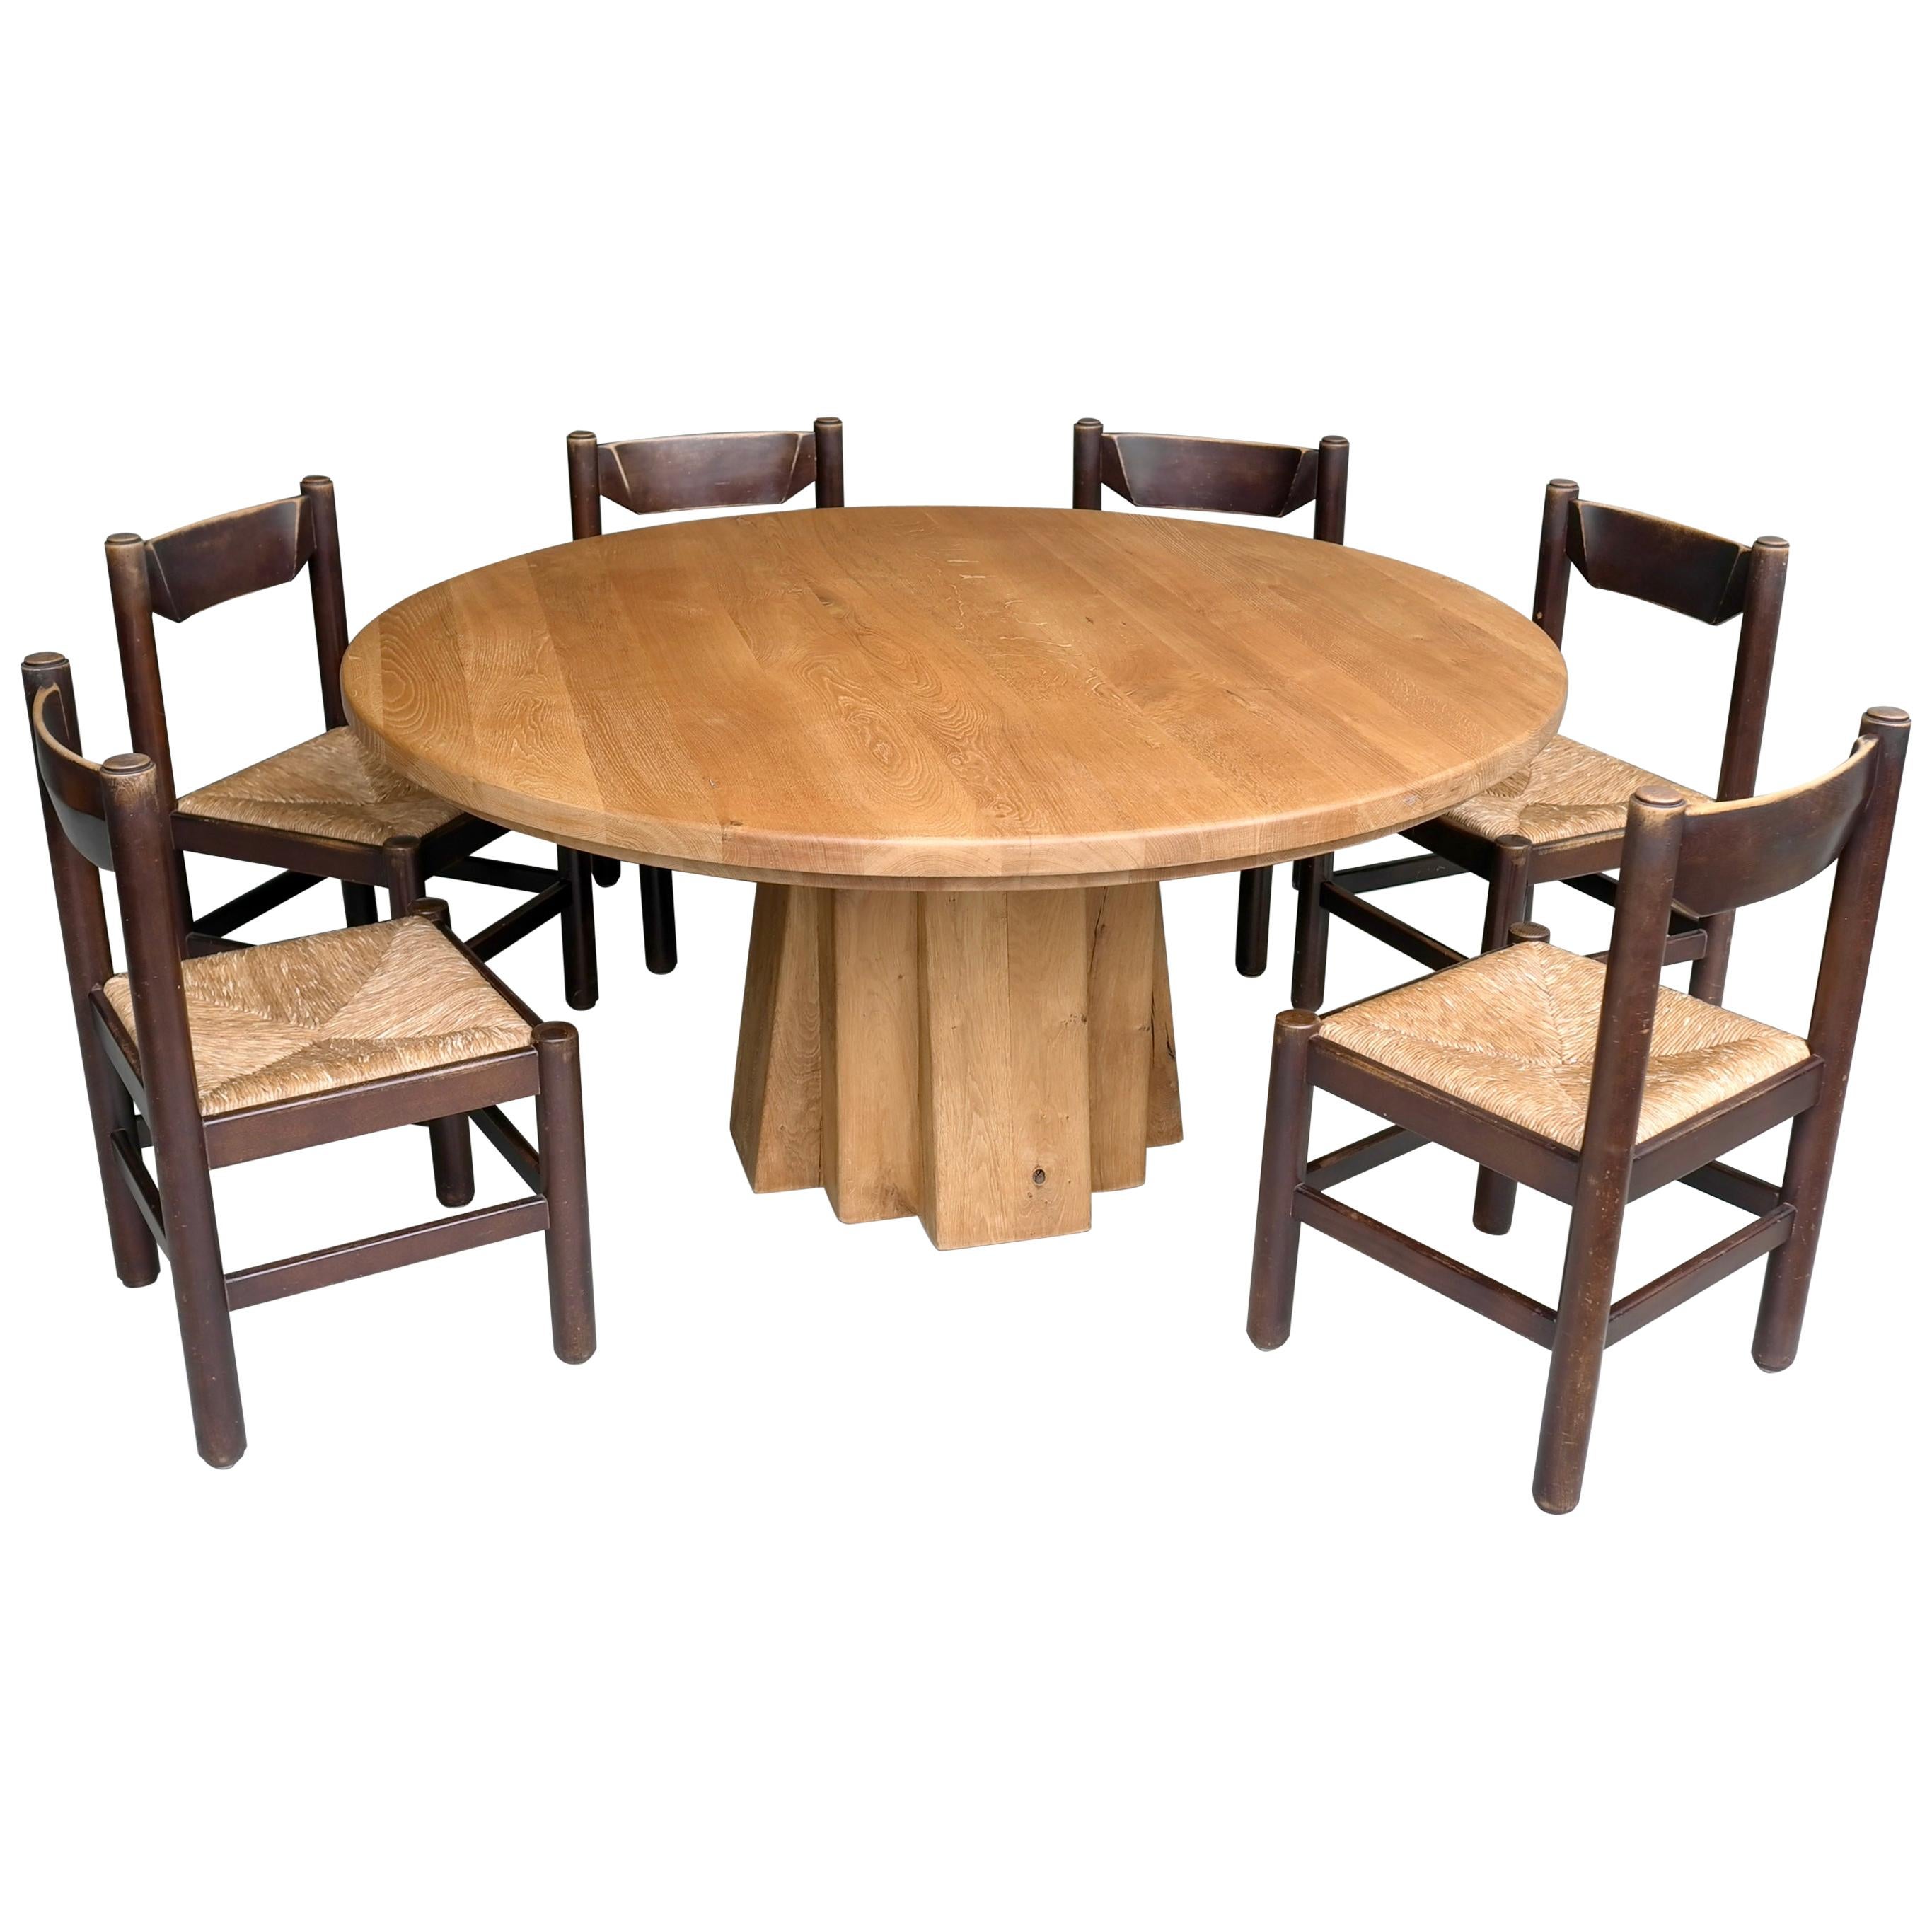 Extra Large Round Oak Sculptural Dining, Large Round Wooden Dining Table And Chairs